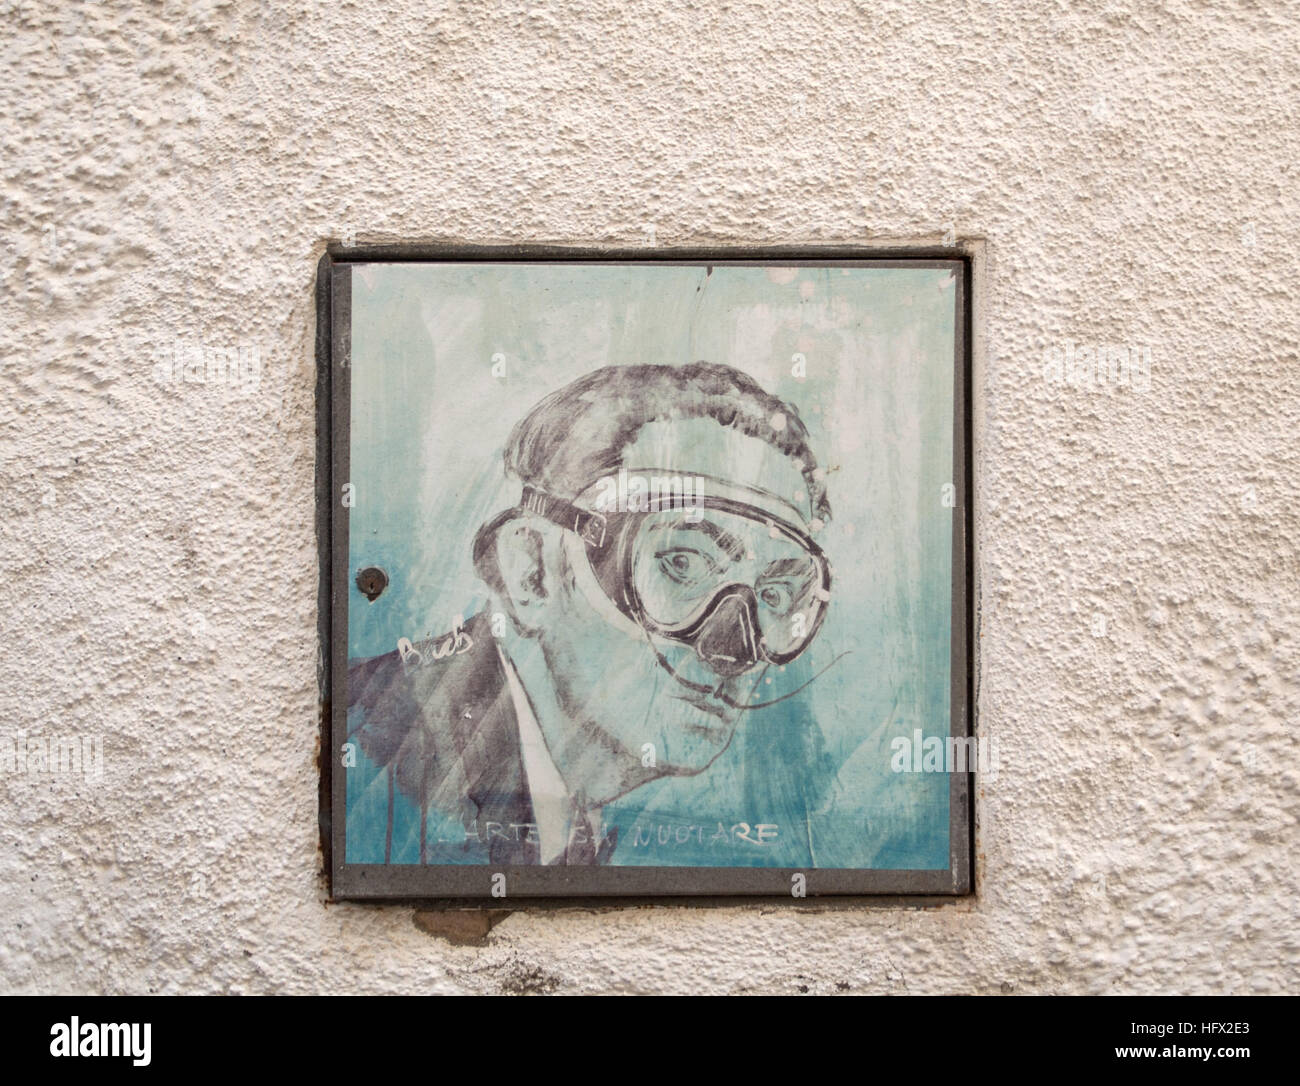 street art painting in Cadaques, Spain Stock Photo